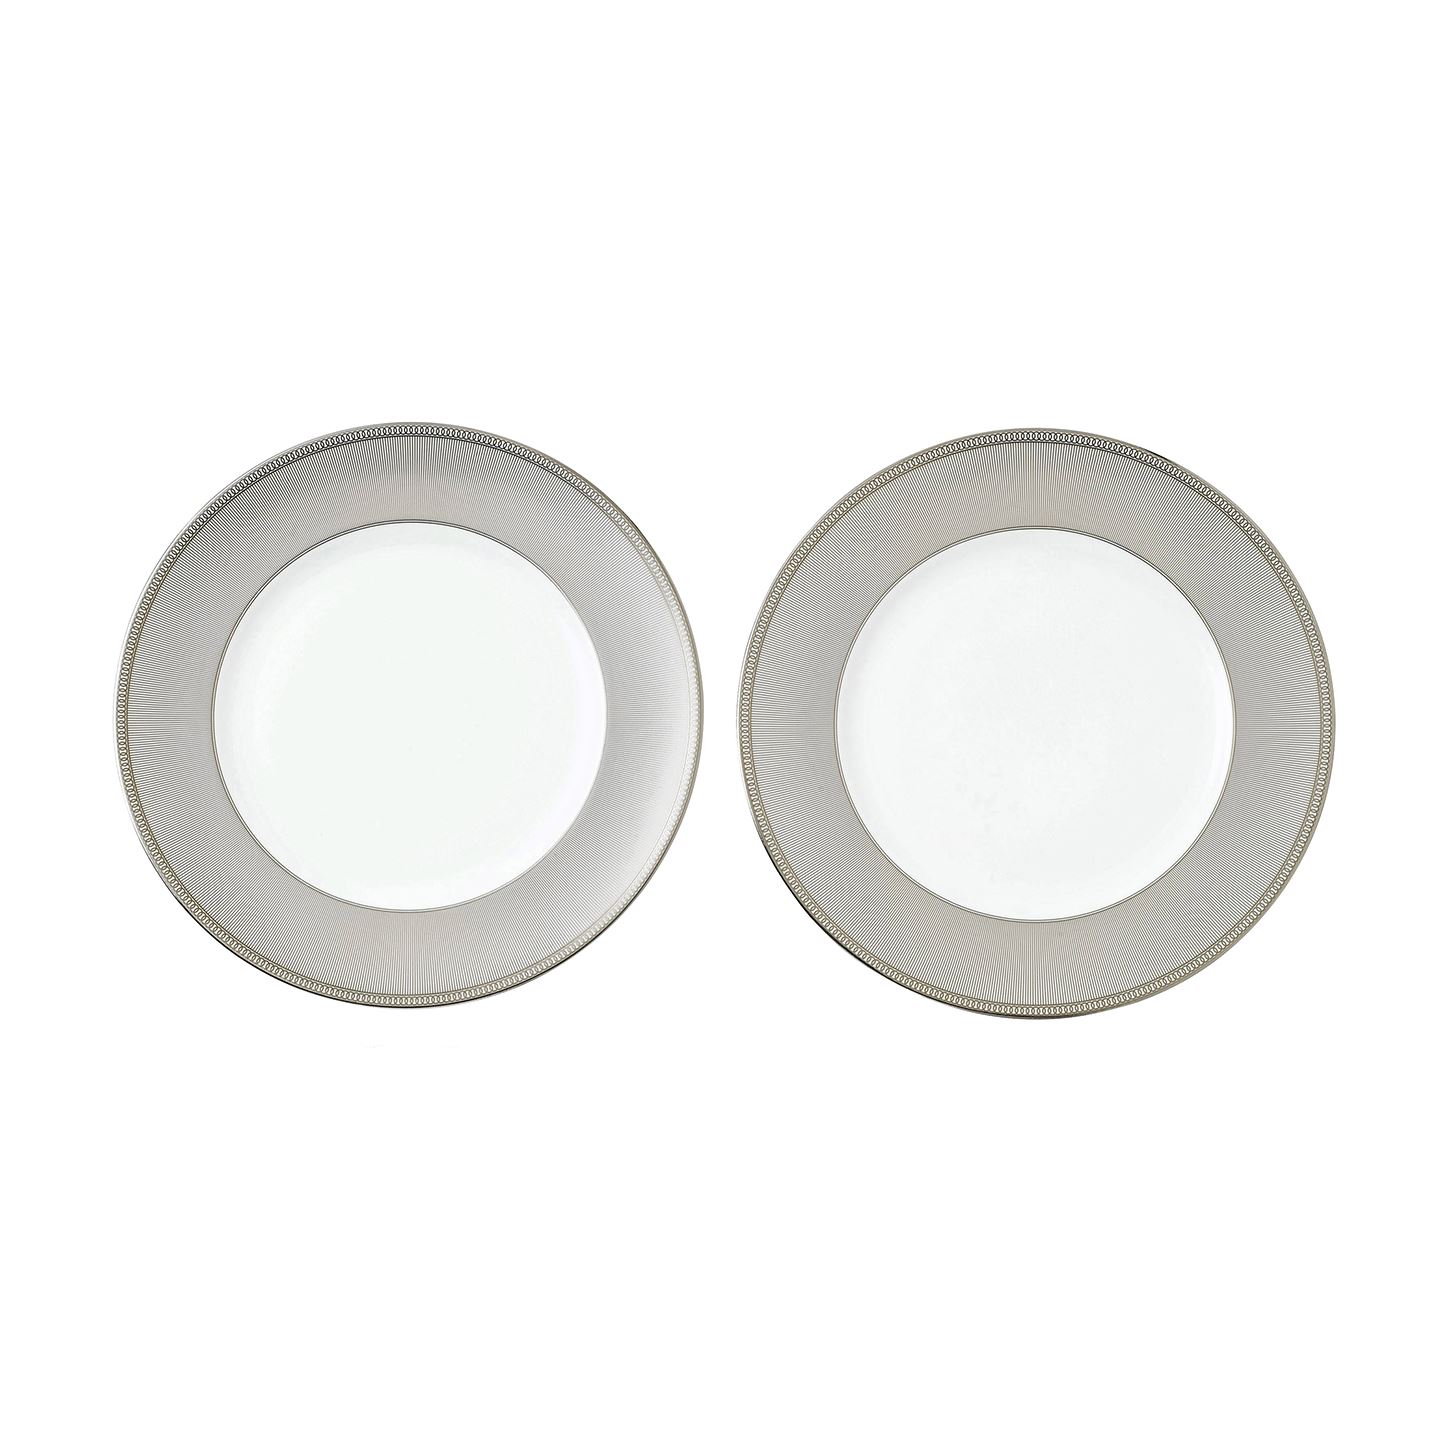 Winter White 27cm Plate, Set of Two | Wedgwood